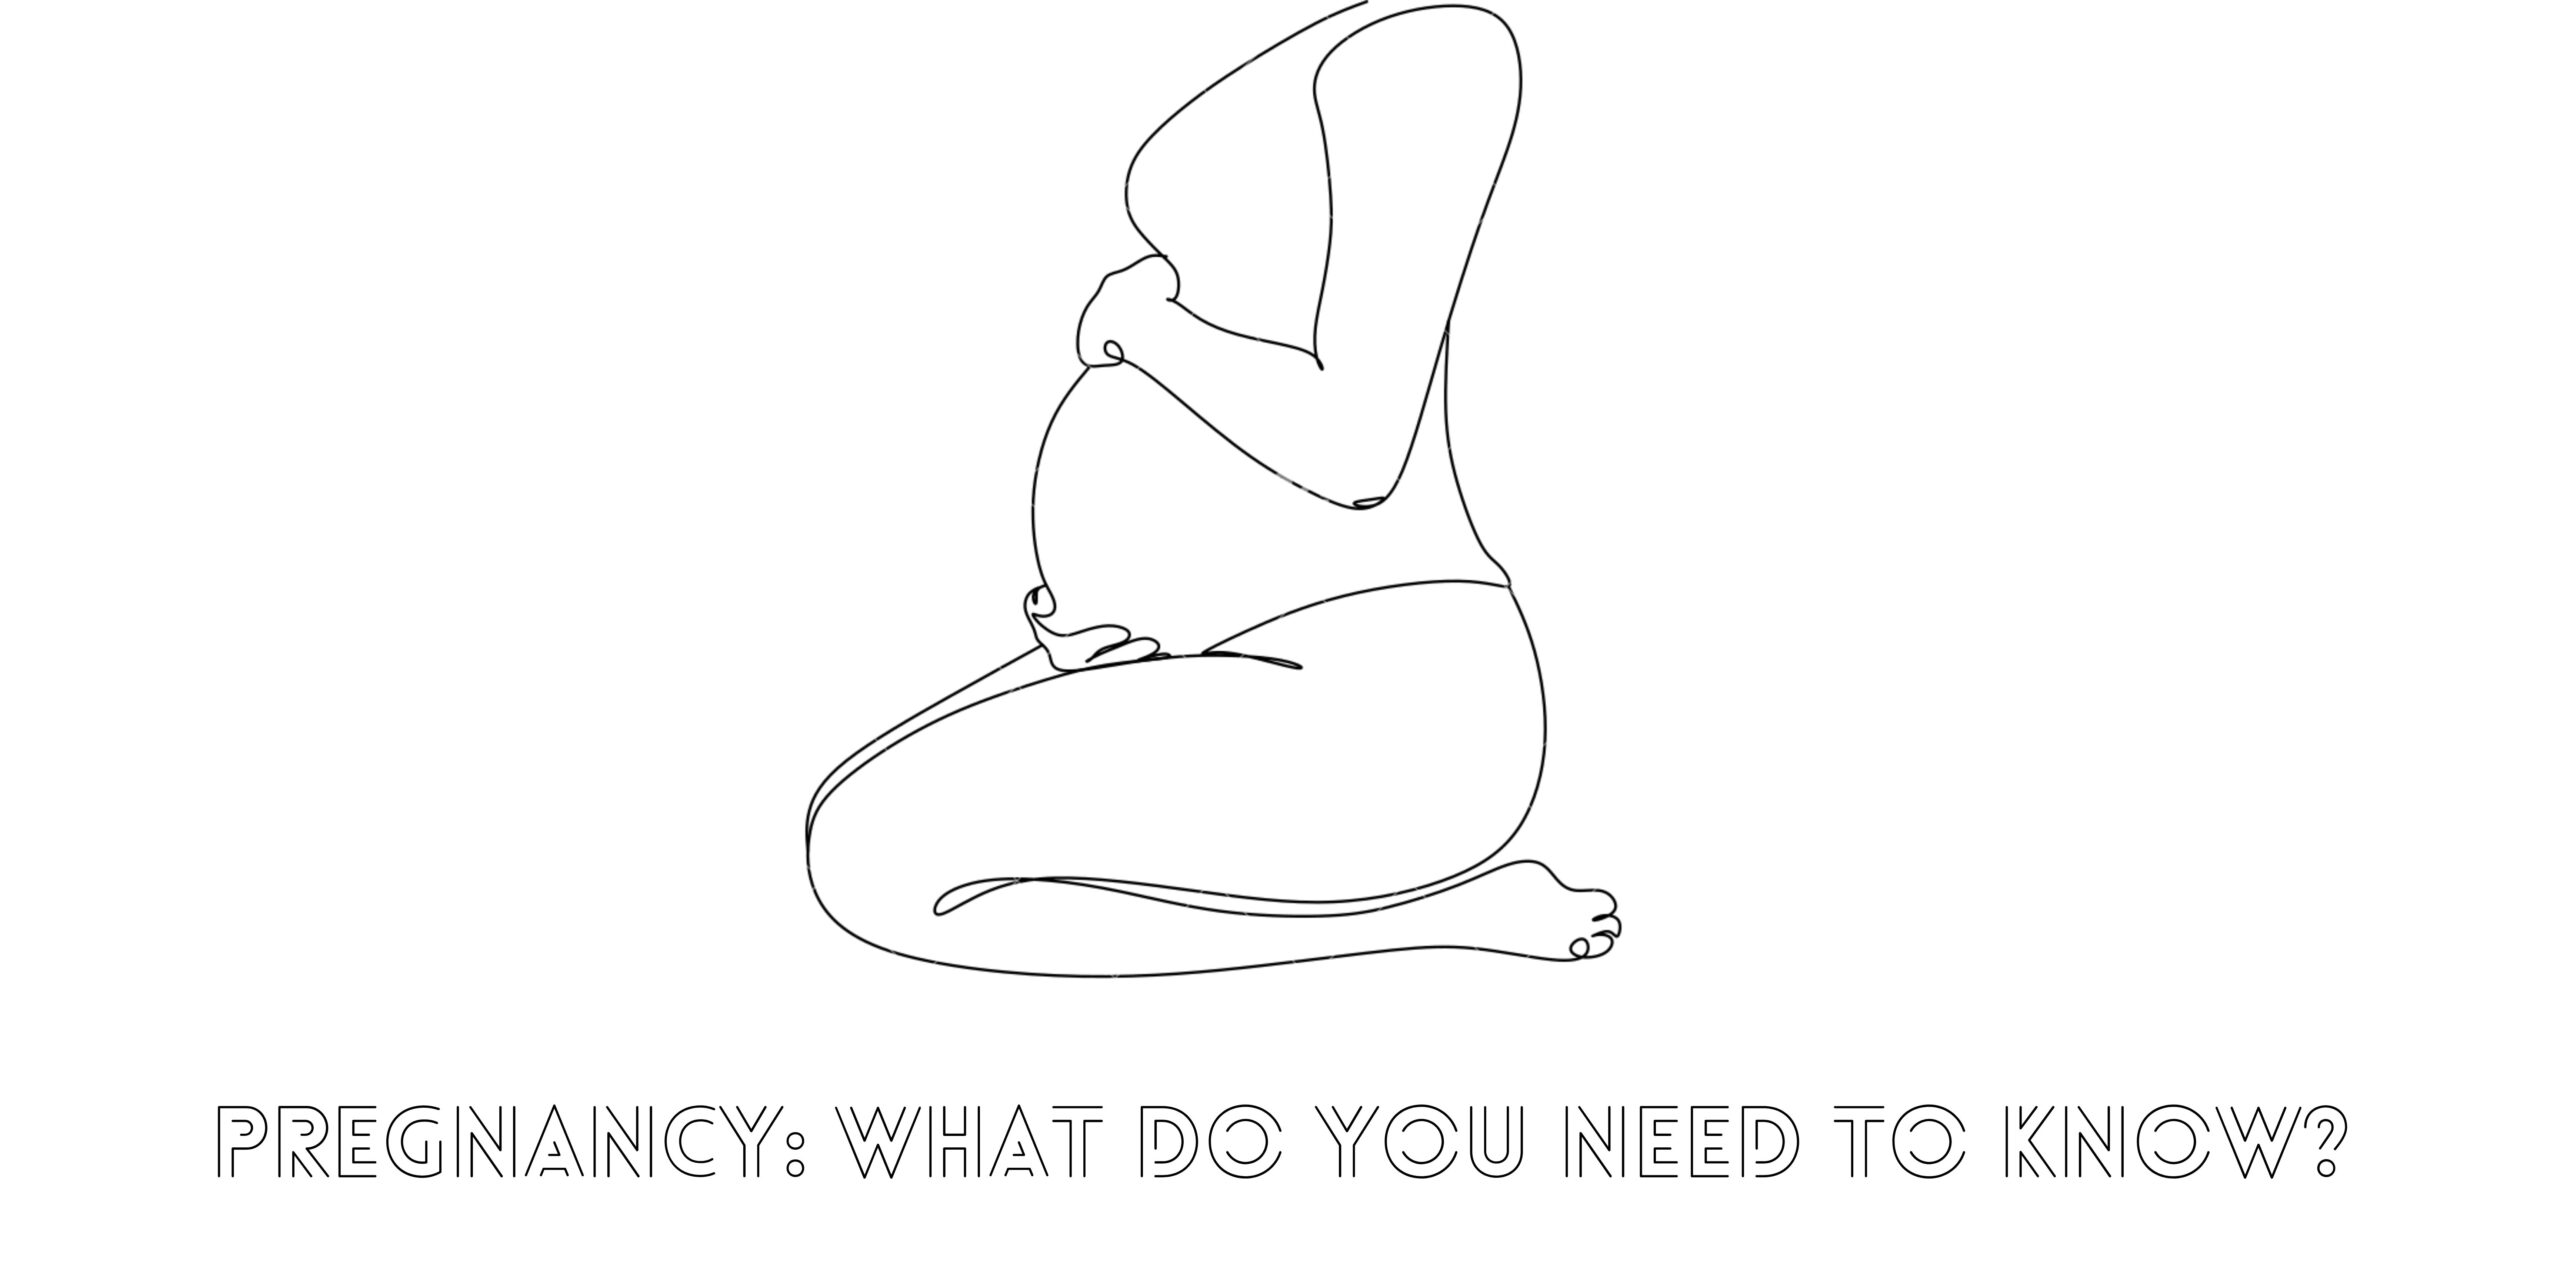 Pregnancy: what do you need to know?